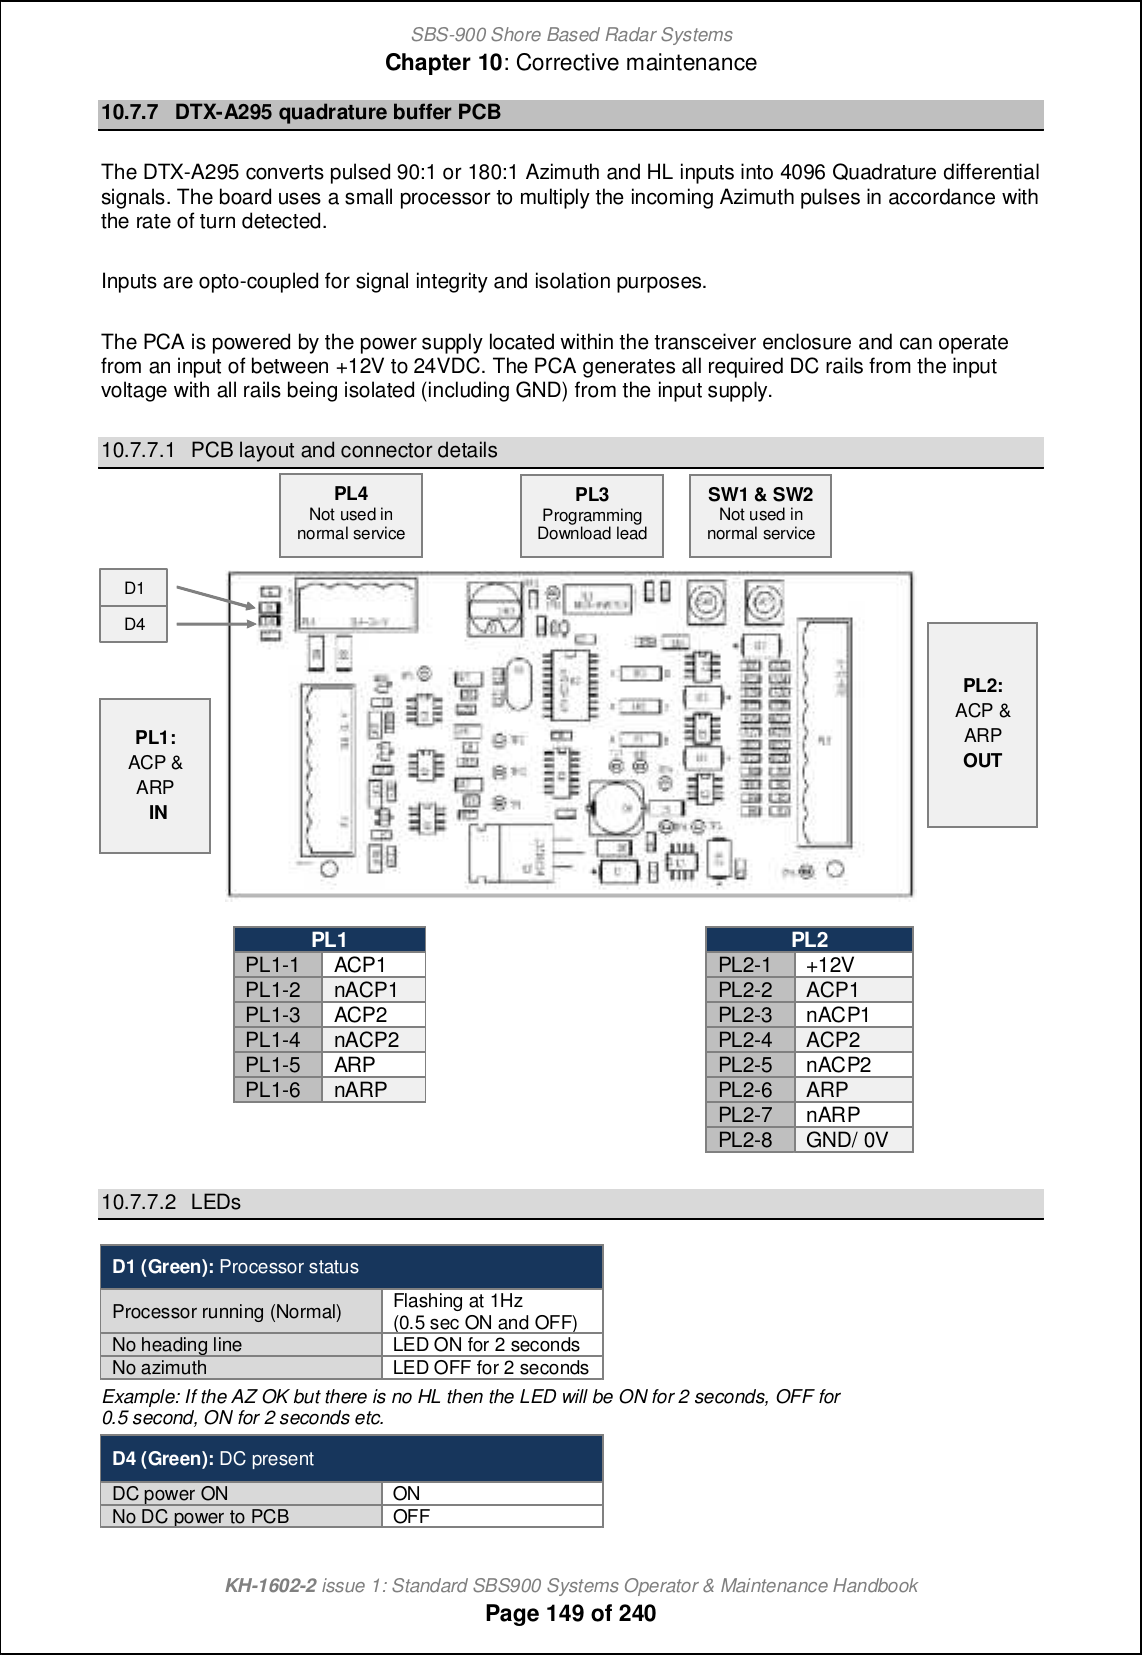 SBS-900 Shore Based Radar SystemsChapter 10: Corrective maintenanceKH-1602-2 issue 1: Standard SBS900 Systems Operator &amp; Maintenance HandbookPage 149 of 24010.7.7 DTX-A295 quadrature buffer PCBThe DTX-A295 converts pulsed 90:1 or 180:1 Azimuth and HL inputs into 4096 Quadrature differentialsignals. The board uses a small processor to multiply the incoming Azimuth pulses in accordance withthe rate of turn detected.Inputs are opto-coupled for signal integrity and isolation purposes.The PCA is powered by the power supply located within the transceiver enclosure and can operatefrom an input of between +12V to 24VDC. The PCA generates all required DC rails from the inputvoltage with all rails being isolated (including GND) from the input supply.10.7.7.1 PCB layout and connector detailsPL1PL2PL1-1ACP1PL2-1+12VPL1-2nACP1PL2-2ACP1PL1-3ACP2PL2-3nACP1PL1-4nACP2PL2-4ACP2PL1-5ARPPL2-5nACP2PL1-6nARPPL2-6ARPPL2-7nARPPL2-8GND/ 0V10.7.7.2 LEDsD1 (Green): Processor statusProcessor running (Normal) Flashing at 1Hz(0.5 sec ON and OFF)No heading line LED ON for 2 secondsNo azimuth LED OFF for 2 secondsExample: If the AZ OK but there is no HL then the LED will be ON for 2 seconds, OFF for0.5 second, ON for 2 seconds etc.D4 (Green): DC presentDC power ON ONNo DC power to PCBOFFPL1:ACP &amp;ARPINPL2:ACP &amp;ARPOUTPL3ProgrammingDownload leadSW1 &amp; SW2Not used innormal servicePL4Not used innormal serviceD1D4